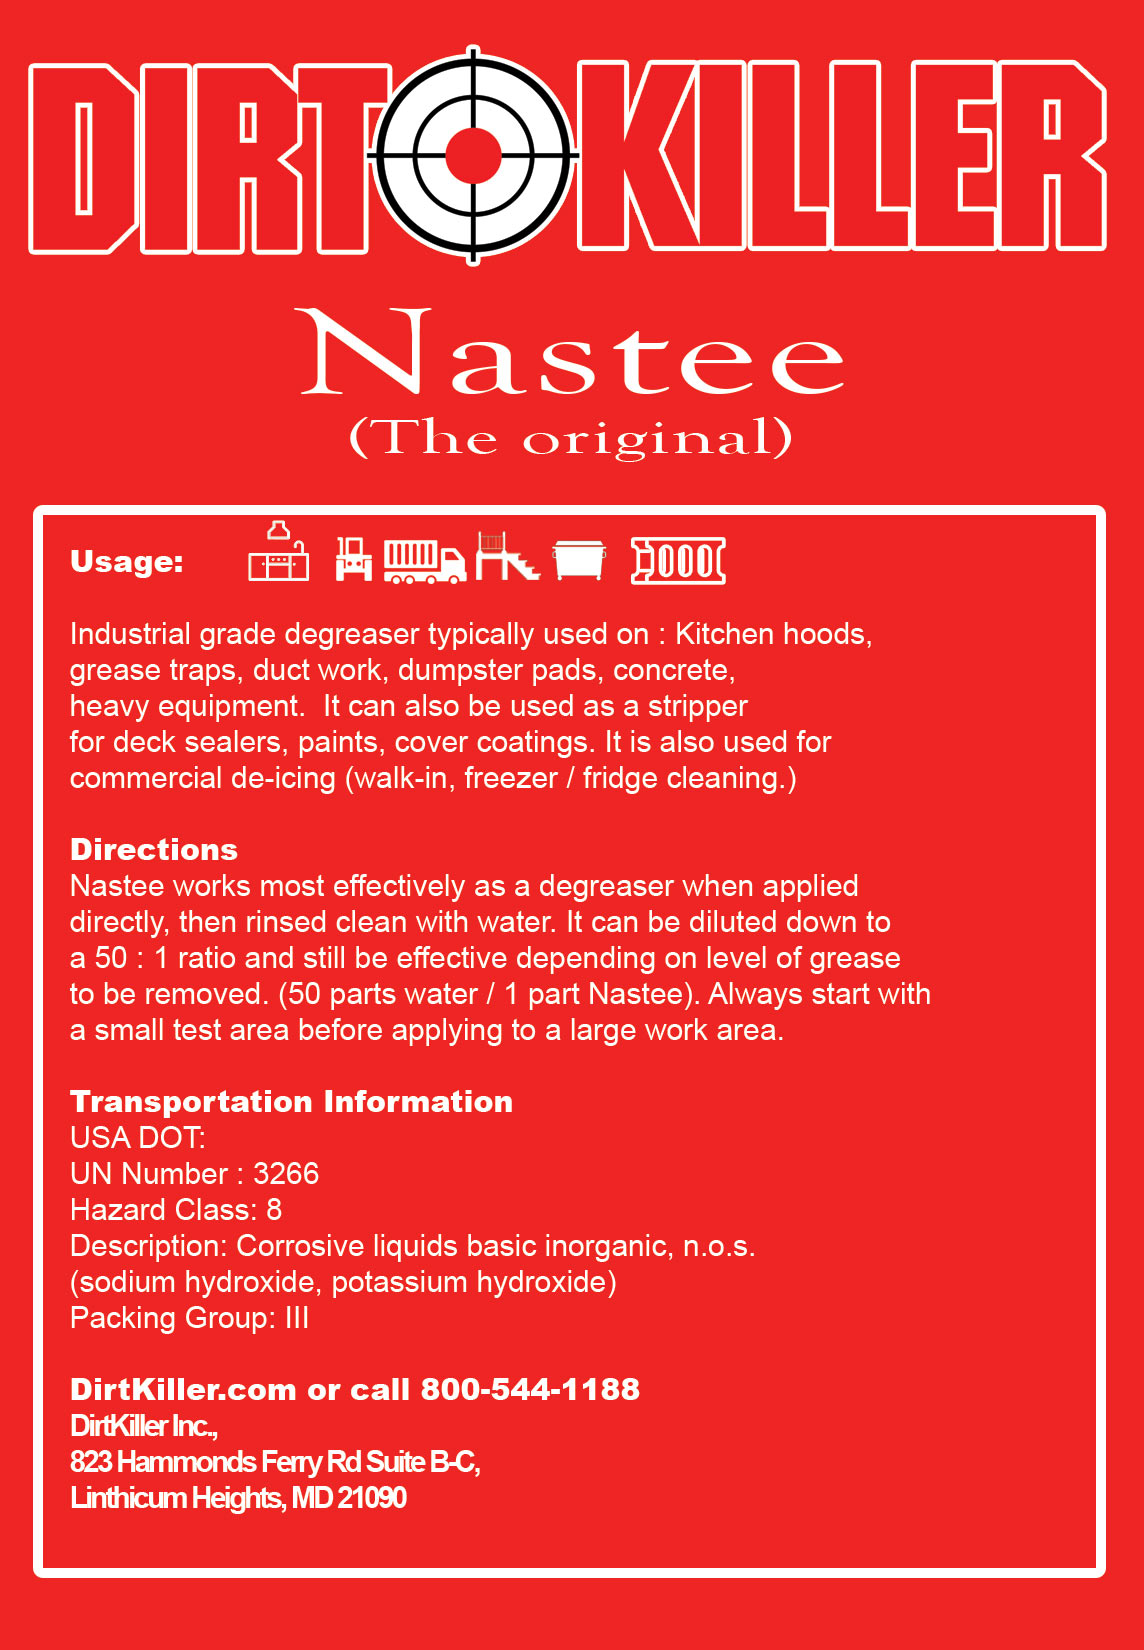 Label 3 - Nastee Industrial Degreaser - Concrete Clean - Remove oil stains